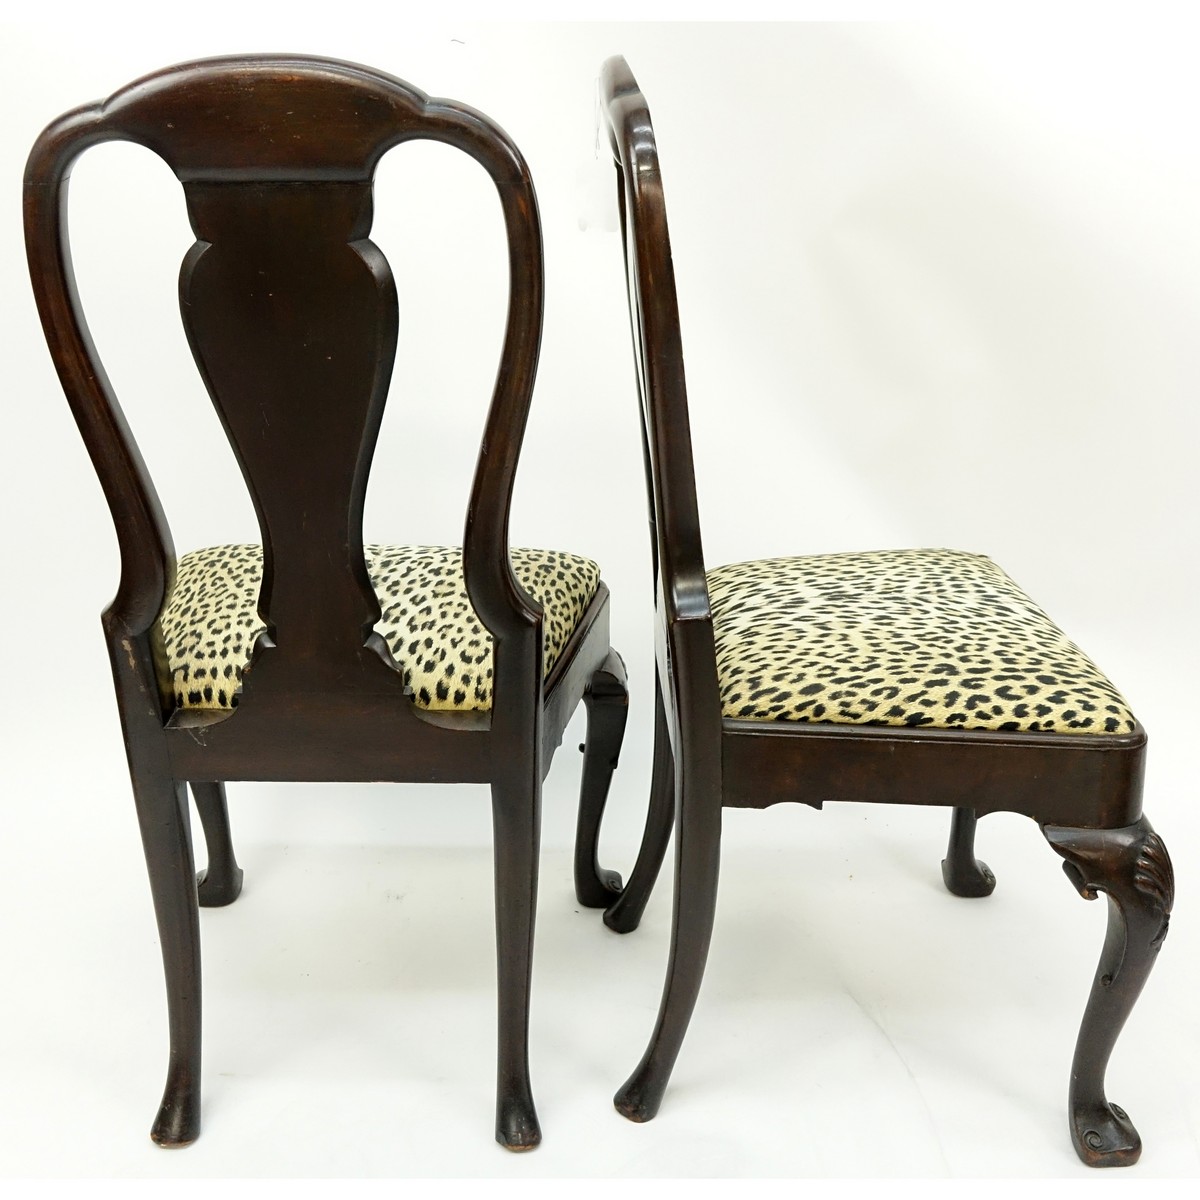 Pair of Queen Anne Upholstered Side Chairs. Scratches to frame and rubbing, small tear to upholstery on one chair.